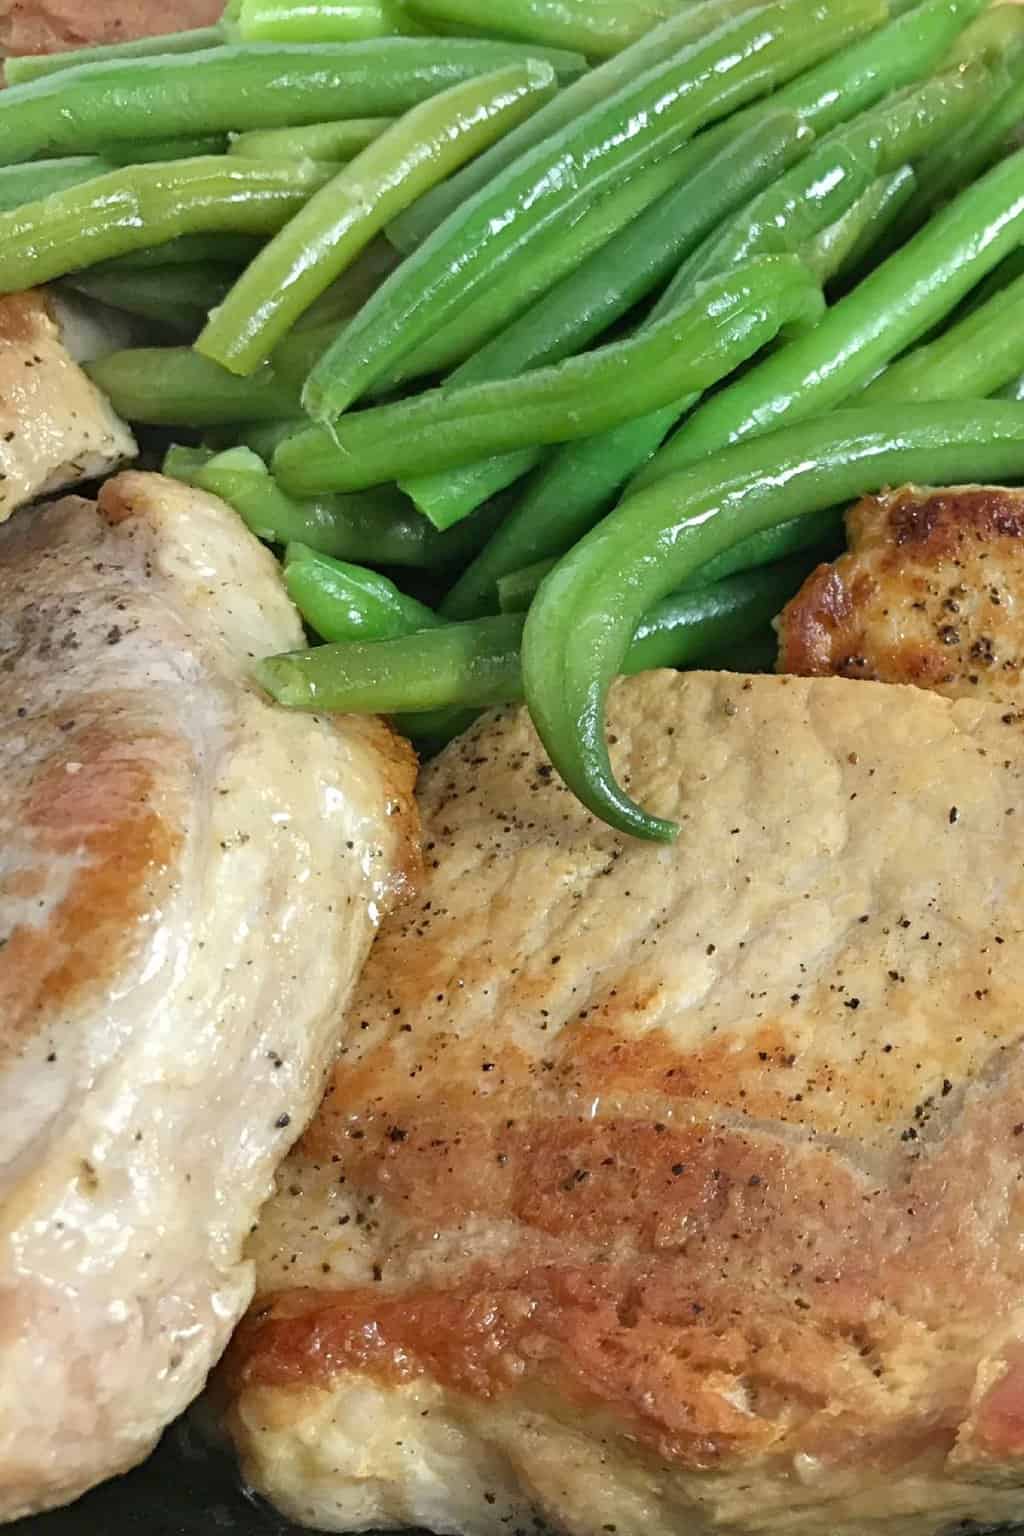 Green beans and cooked pork chops served.